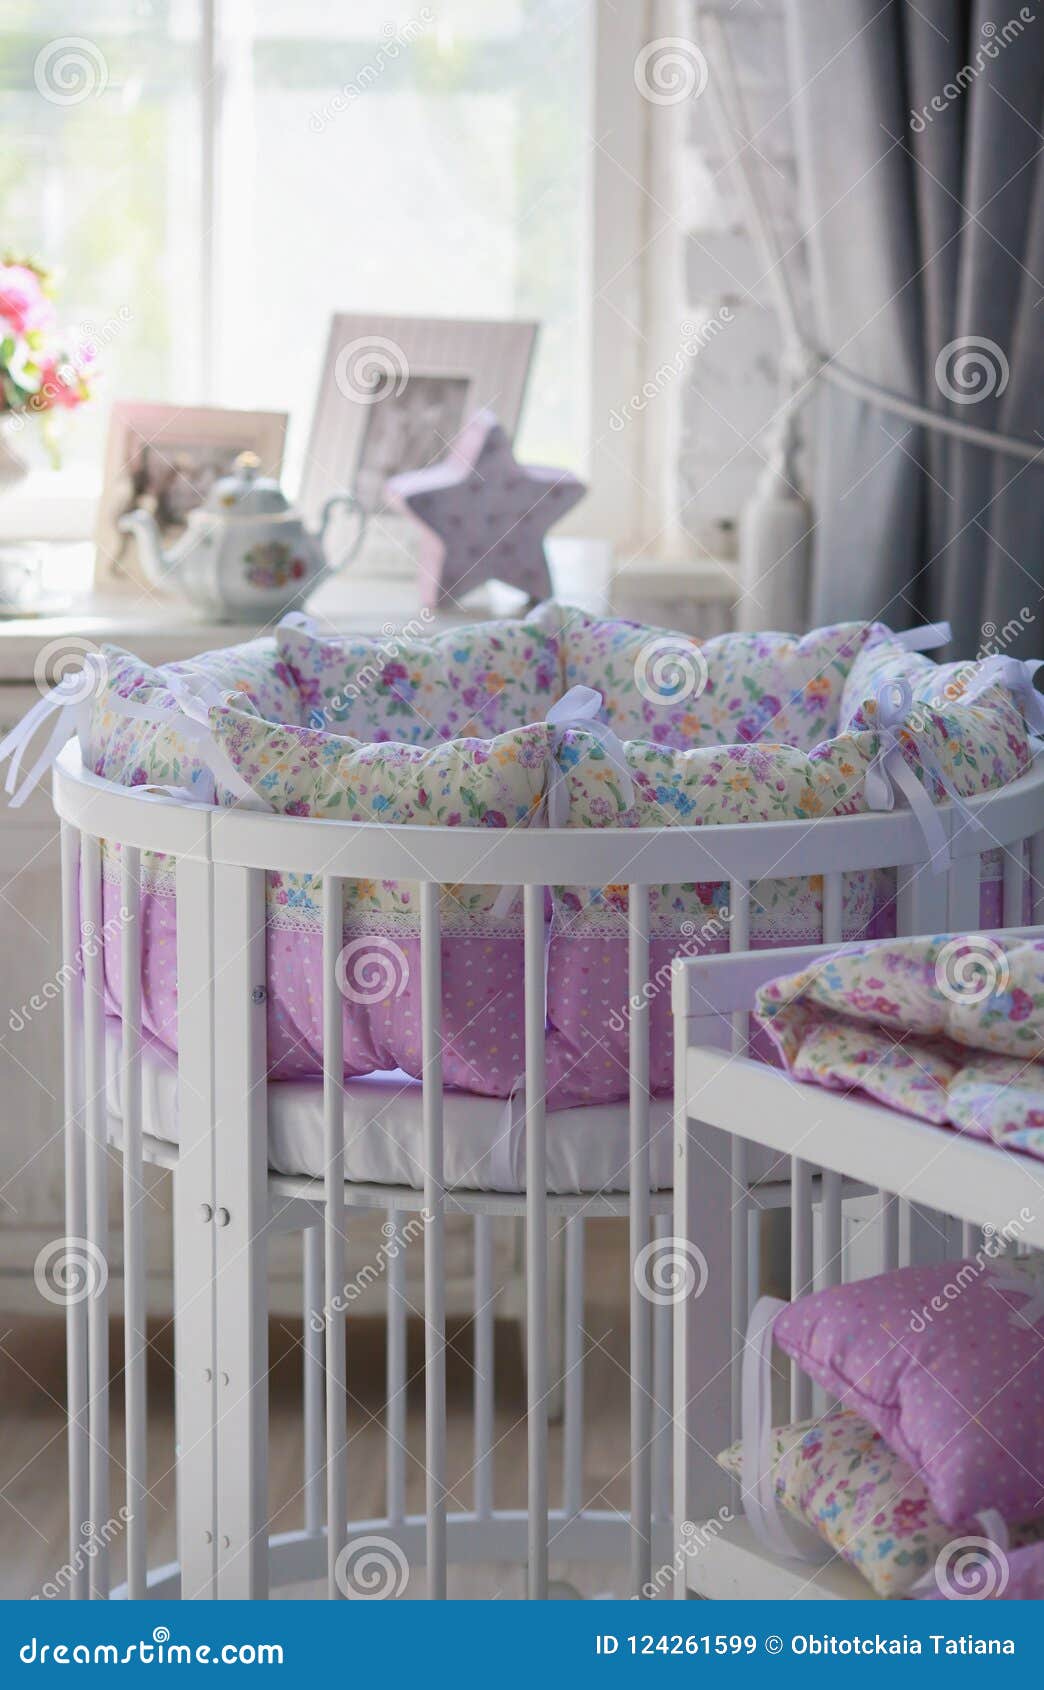 White Cribs For Babies Round Shape Stock Image Image Of Fashion